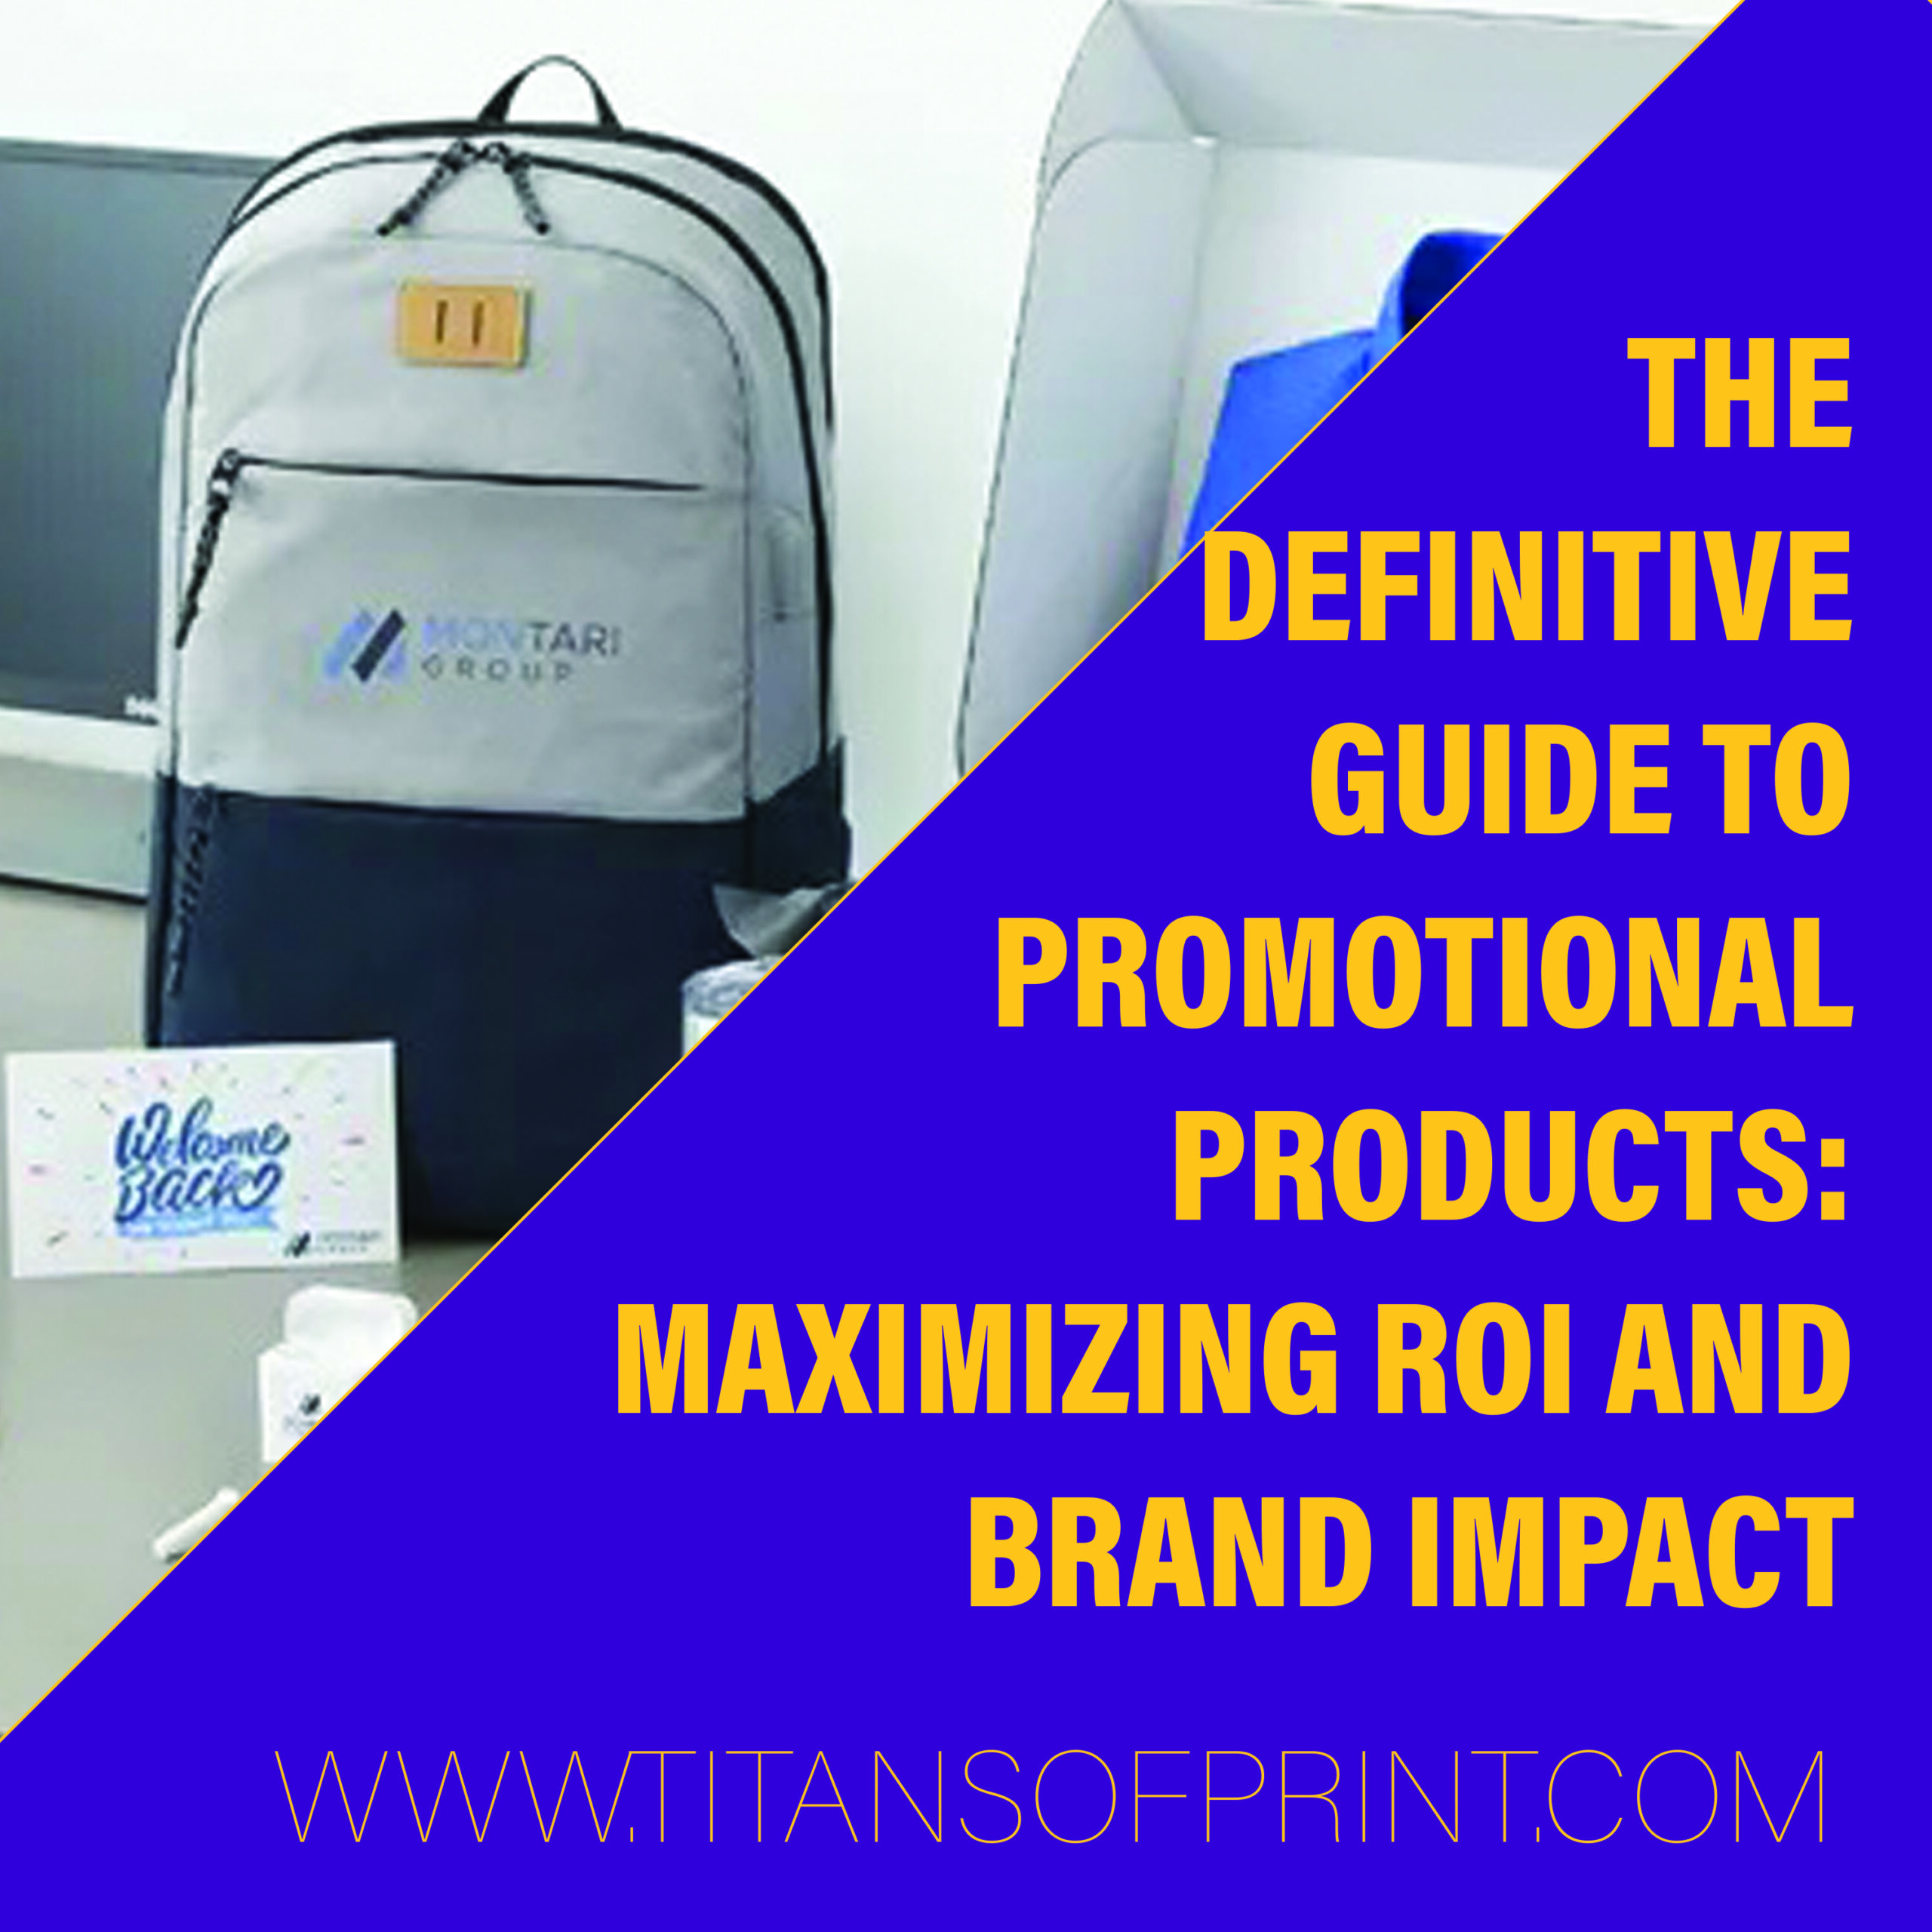 The Definitive Guide to Promotional Products: Maximizing ROI and Brand Impact